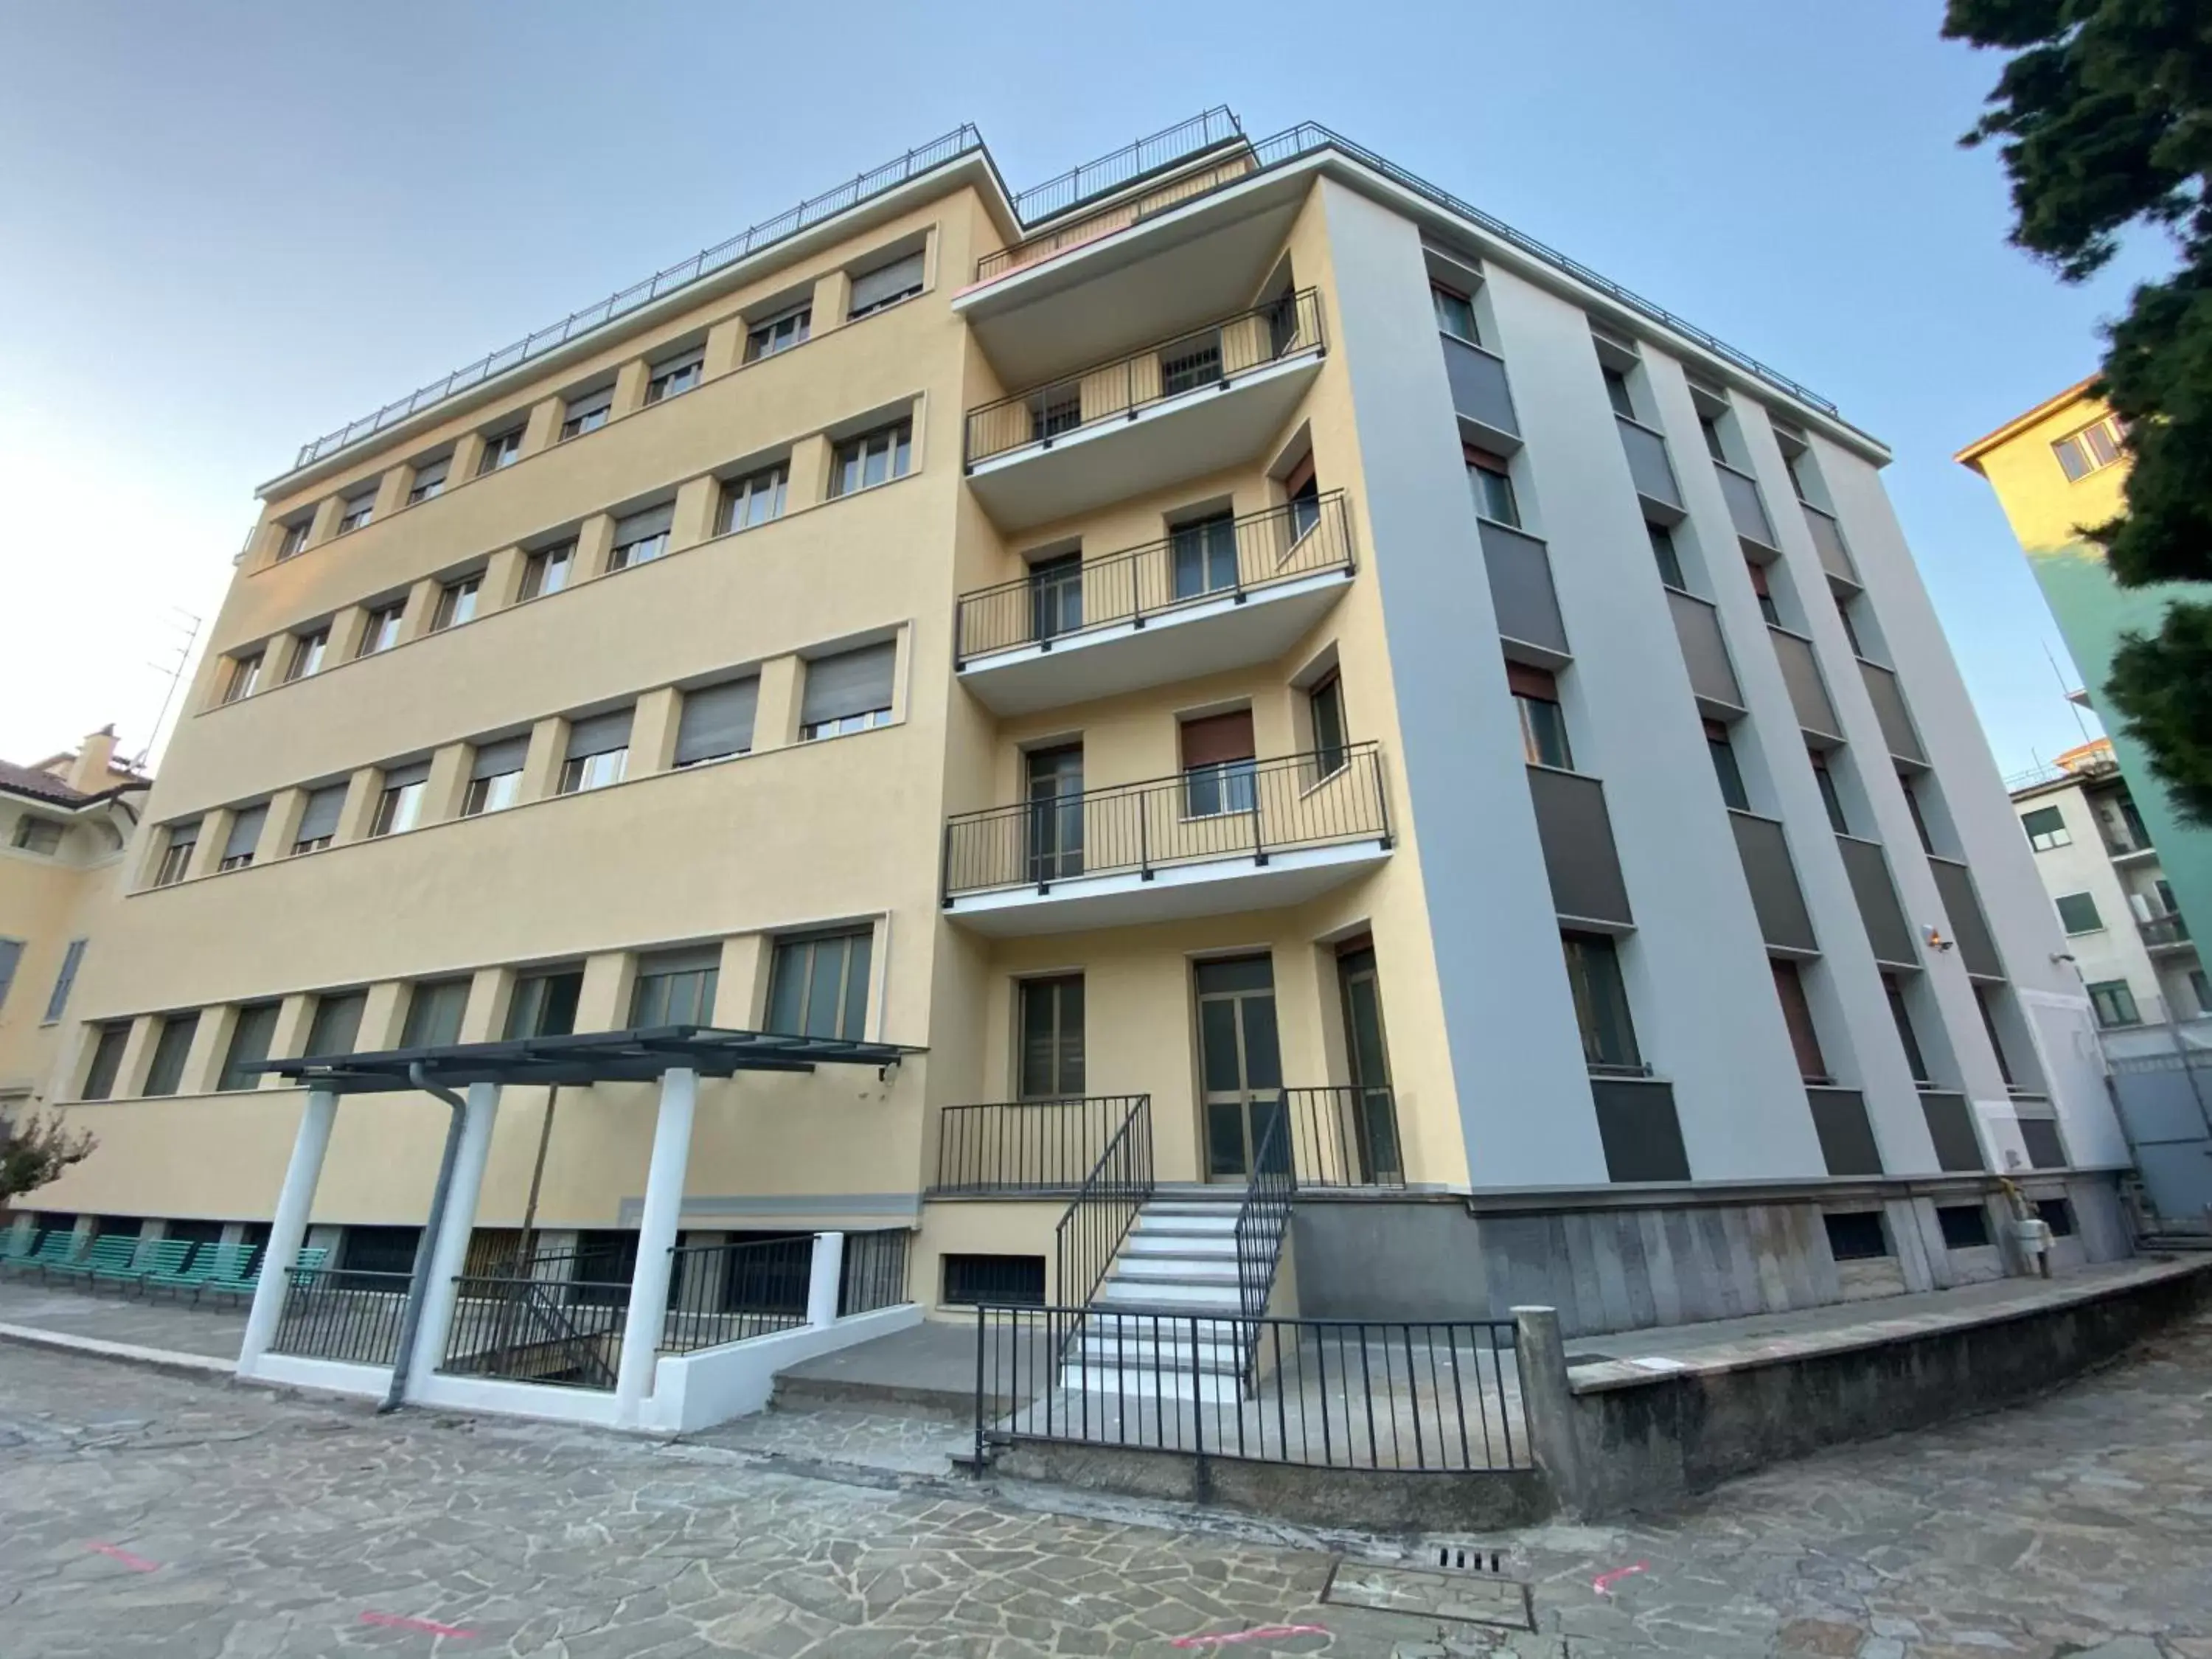 Property Building in Bob W Ticinese